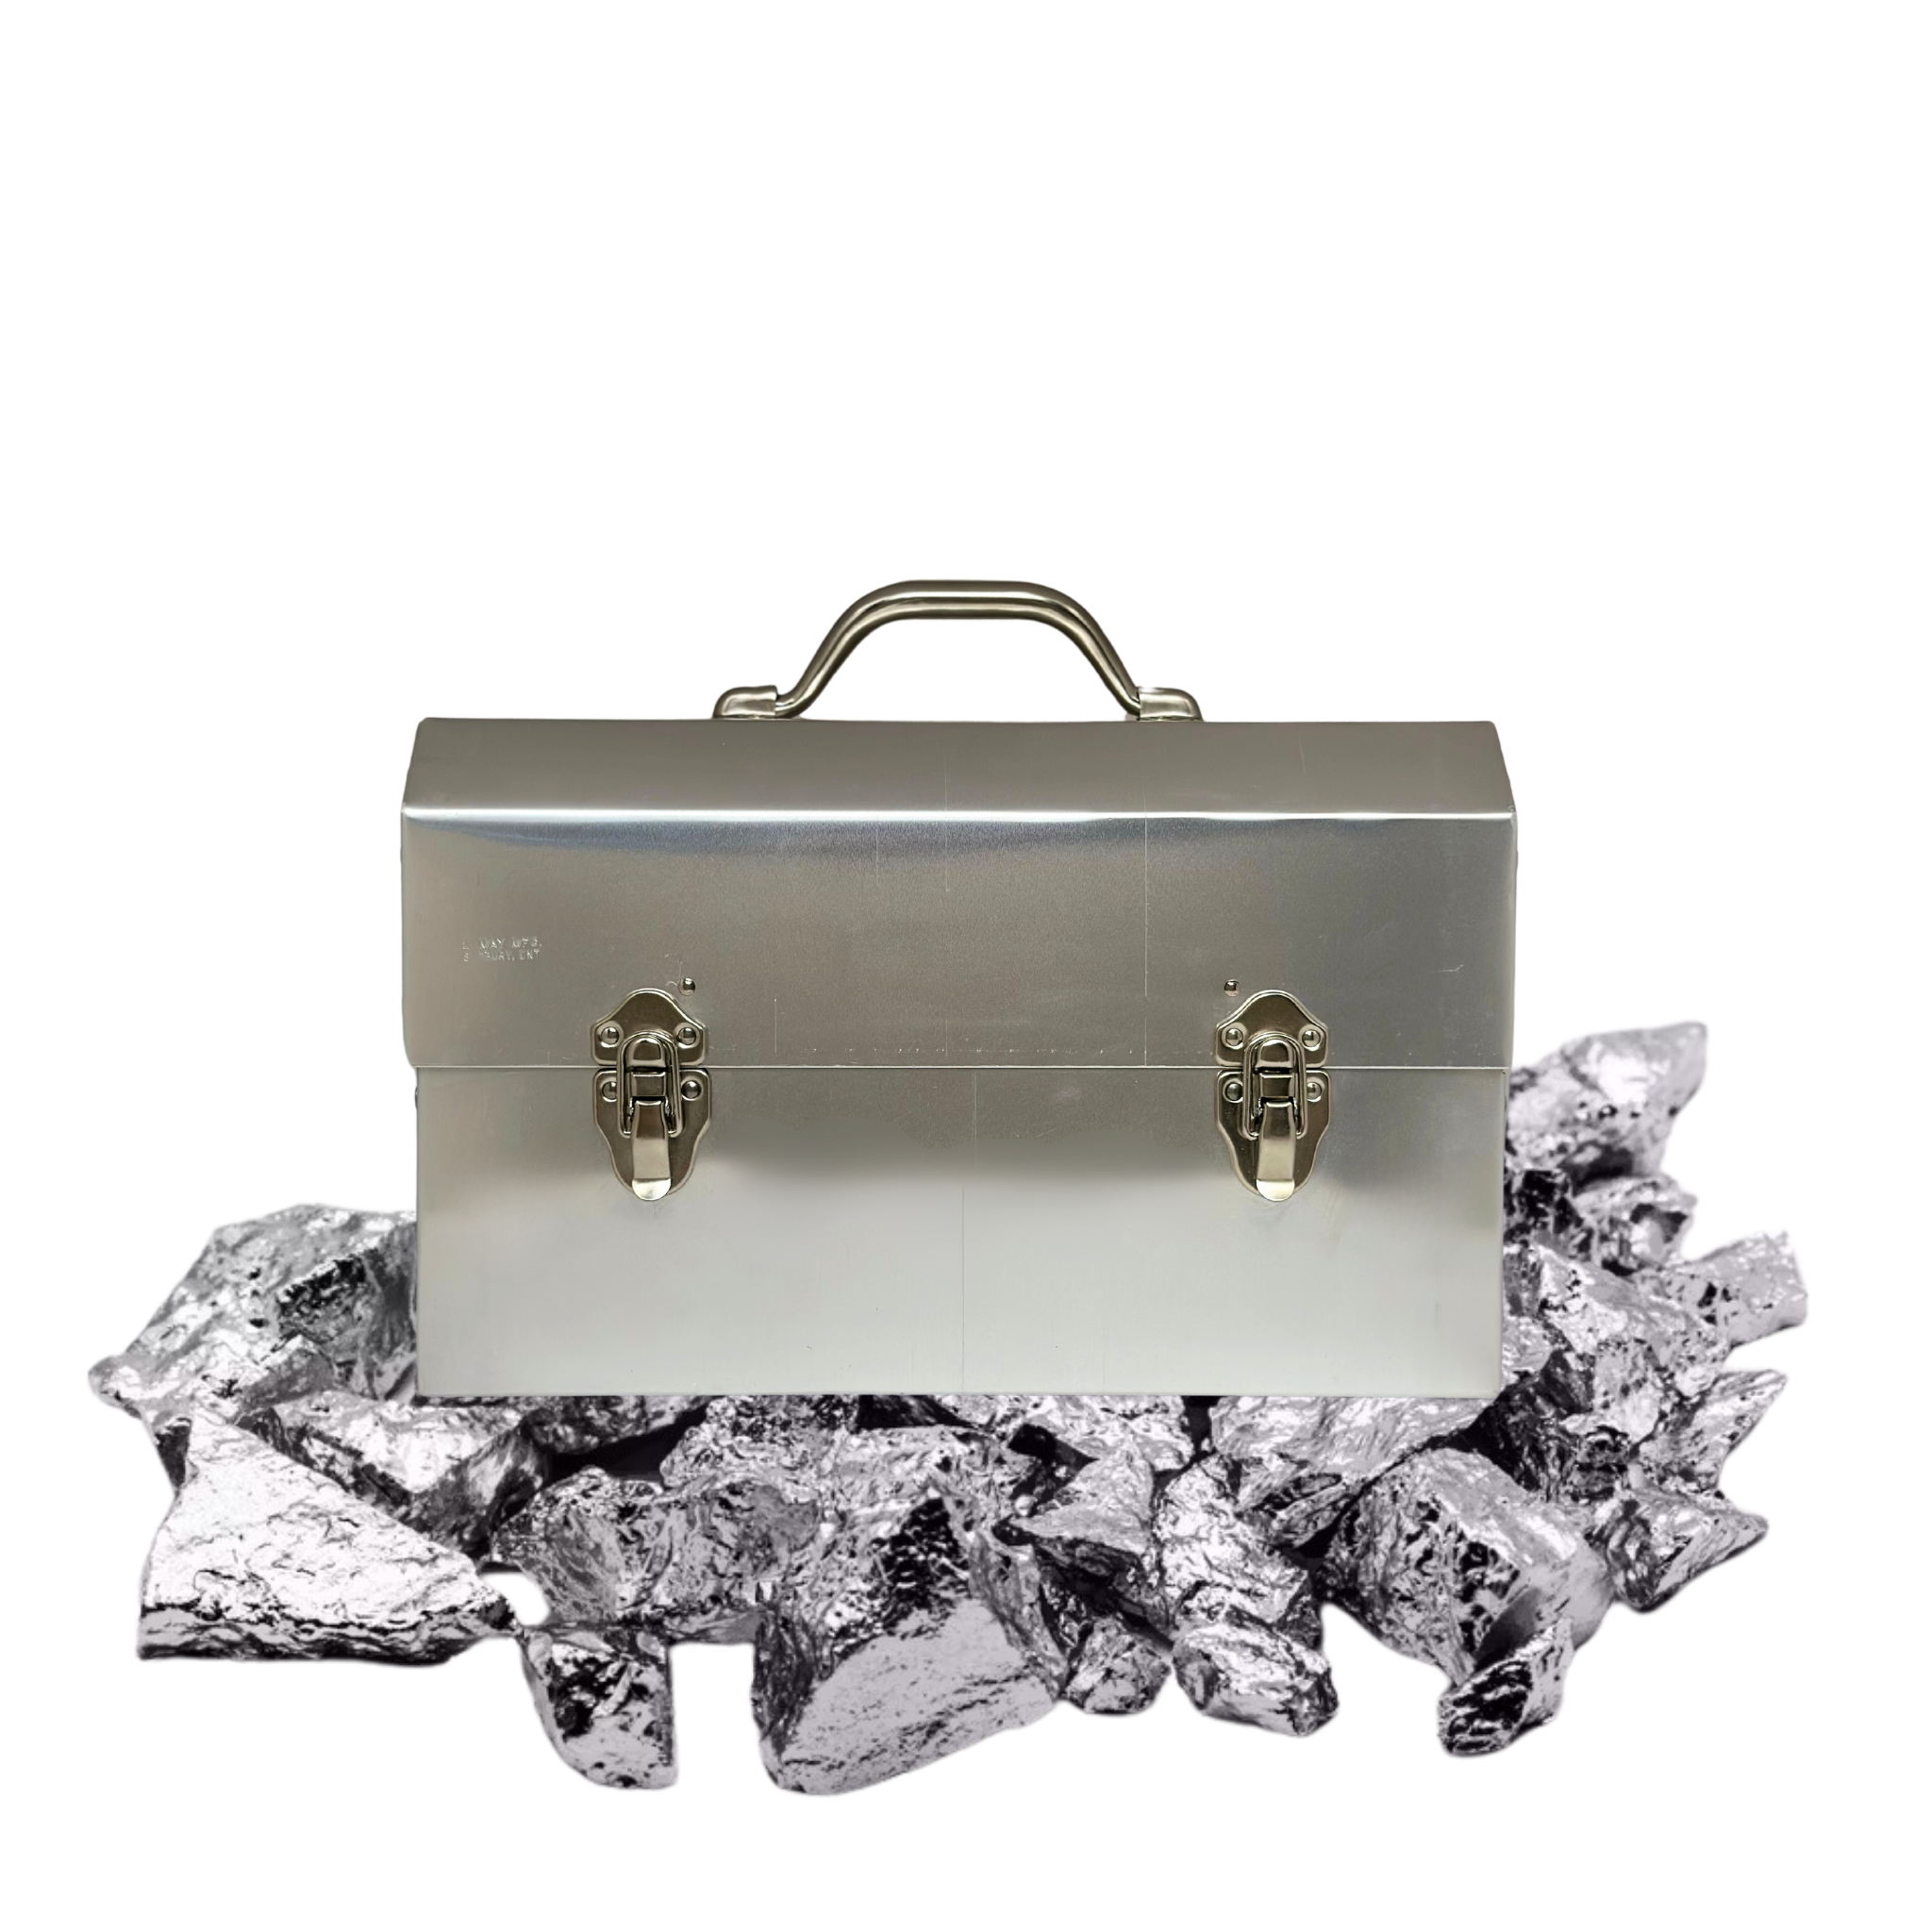 L. May aluminum lunchbox for the gemstone aluminum ore collection